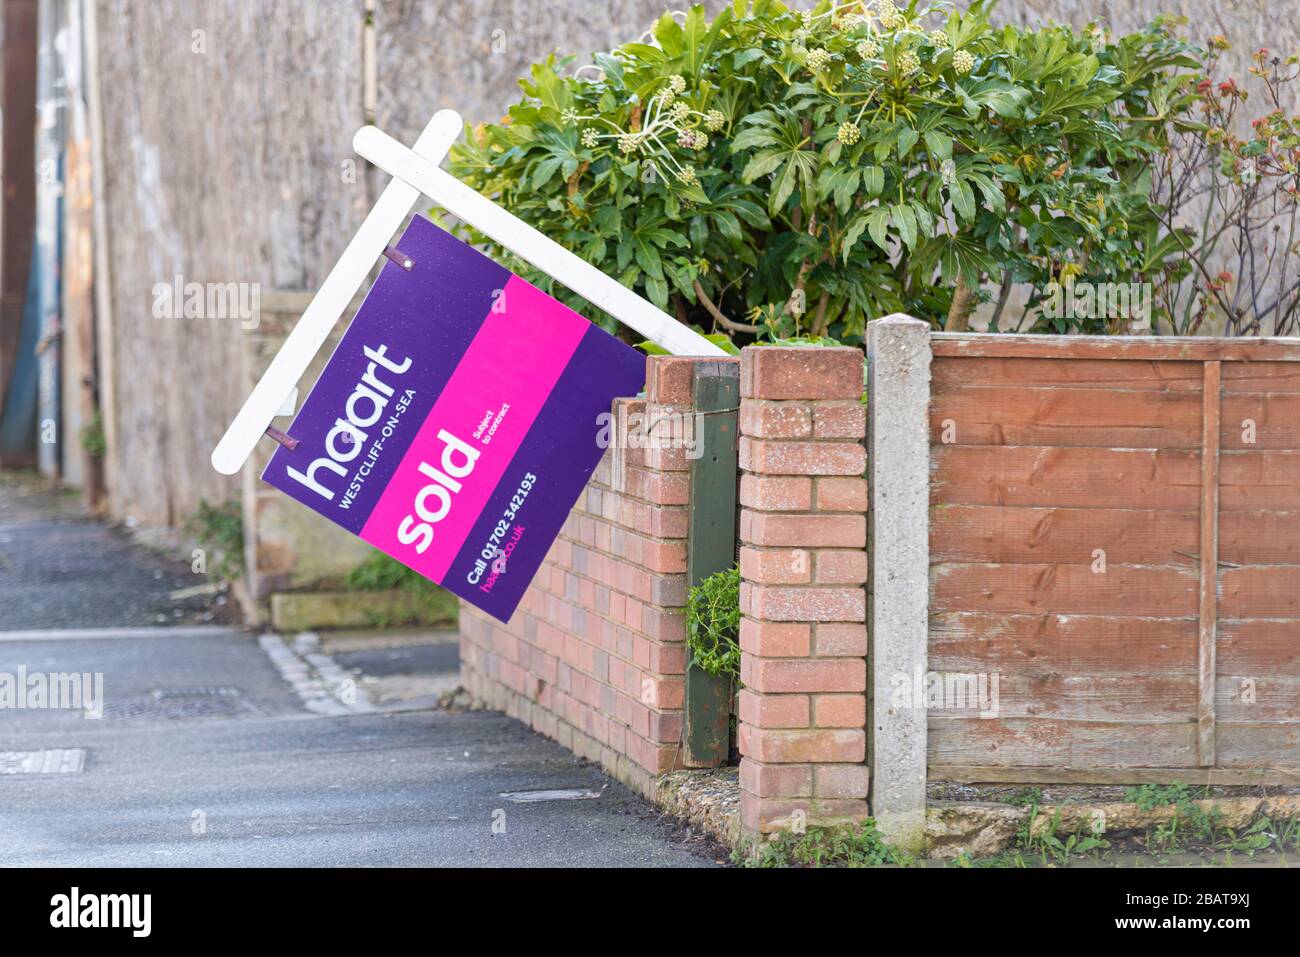 Collapsed property market sold sign during the COVID-19 Coronavirus pandemic outbreak lockdown. Haart estate agent. Concept for collapse of economy Stock Photo